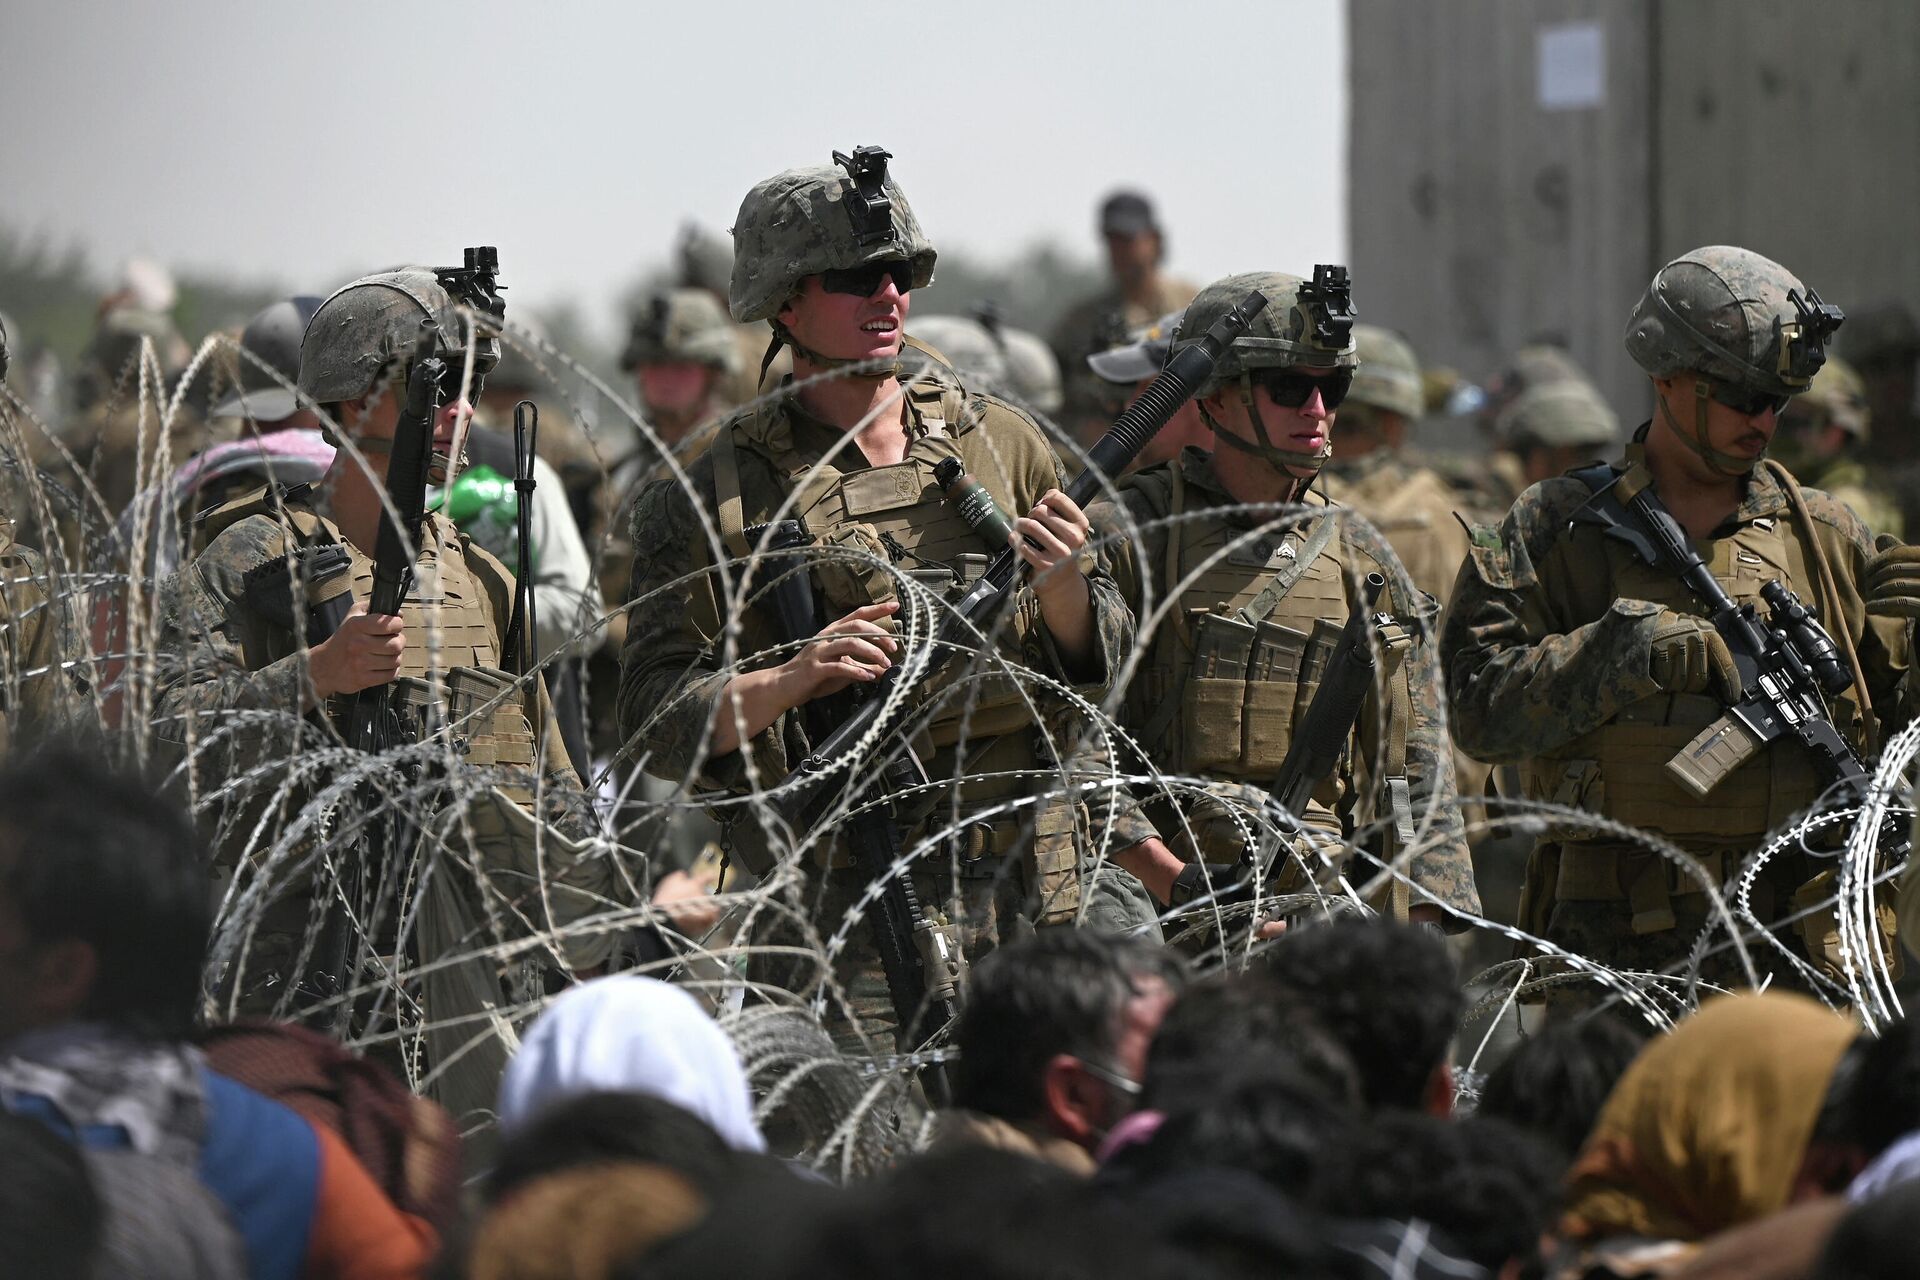 US soldiers stand guard behind barbed wire as Afghans sit on a roadside near the military part of the airport in Kabul on August 20, 2021, hoping to flee from the country after the Taliban's military takeover of Afghanistan - Sputnik International, 1920, 18.09.2021